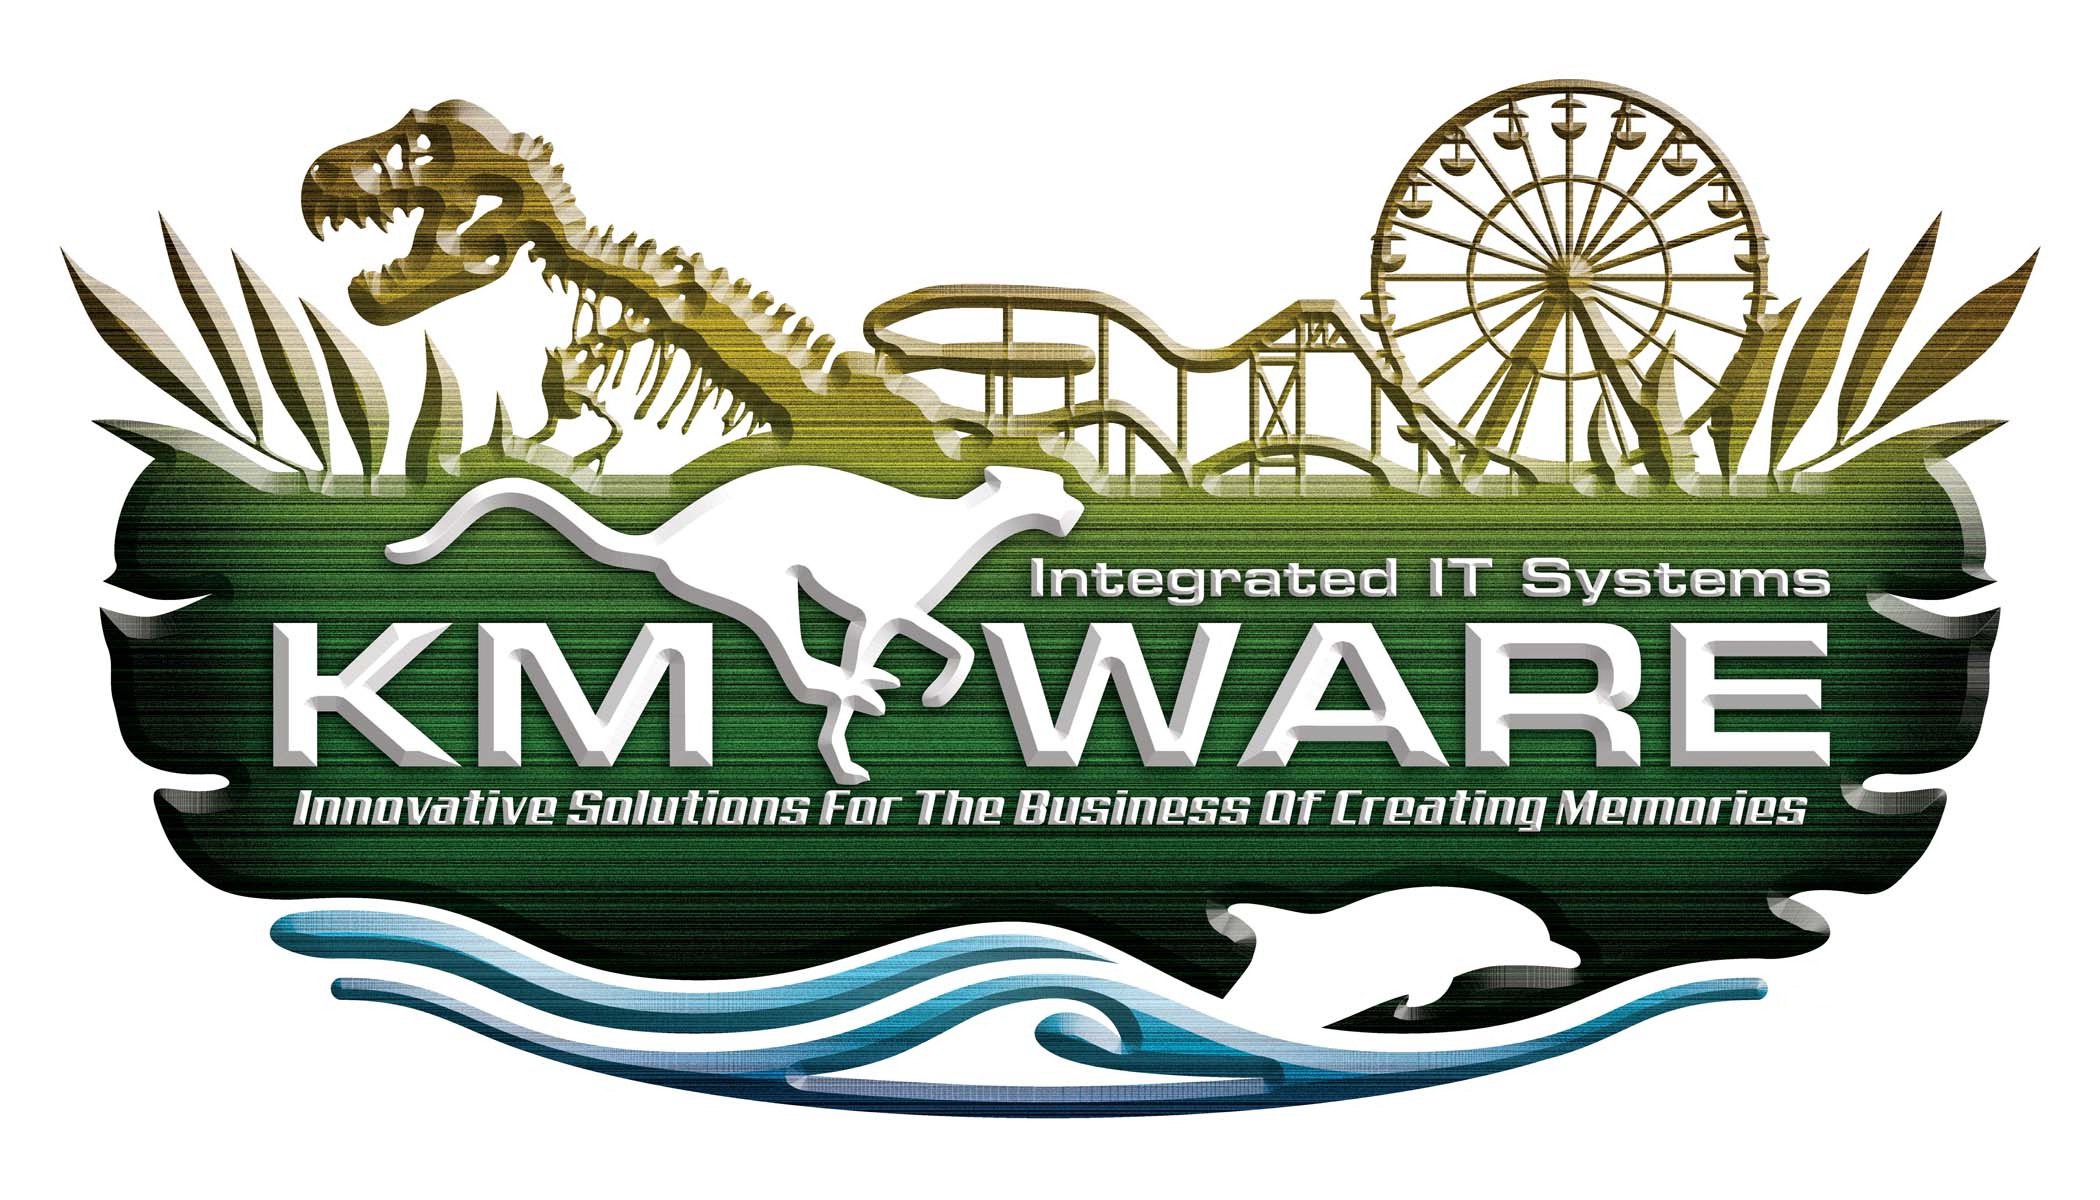  KM WARE INTEGRATED IT SYSTEMS INNOVATIVE SOLUTIONS FOR THE BUSINESS OF CREATING MEMORIES